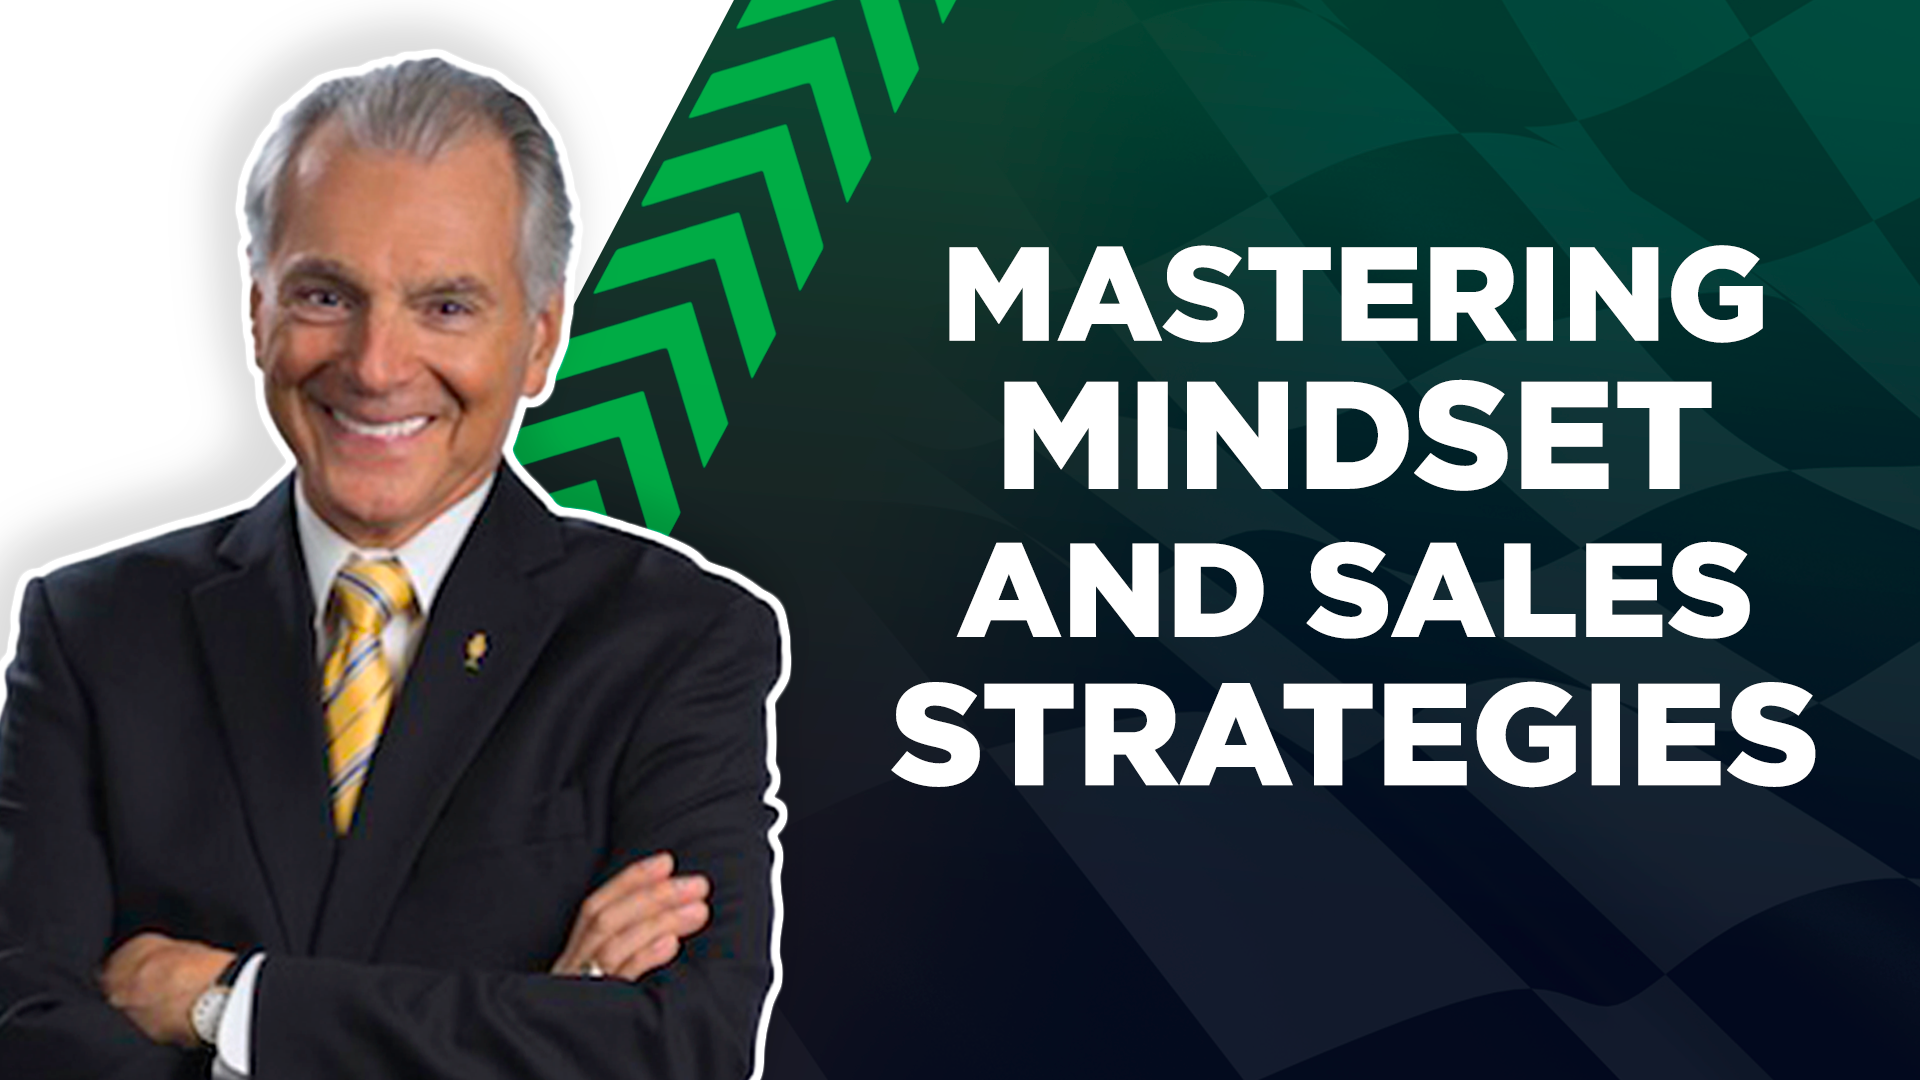 Podcast Pit Stop: Jim Cathcart on Mastering Mindset and Sales Strategies